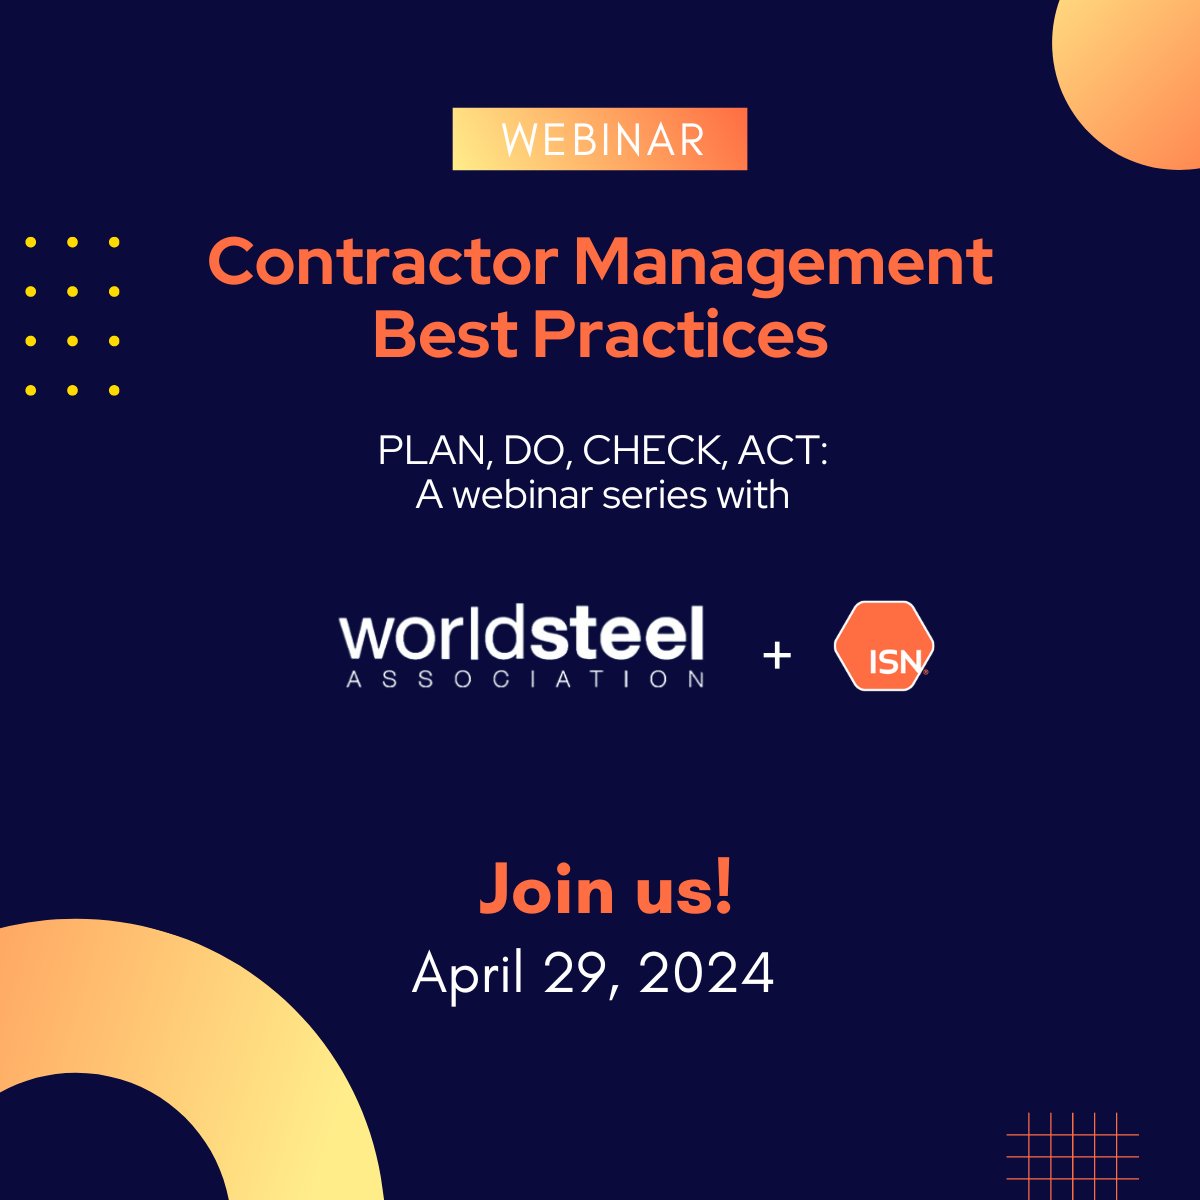 There's still time to join us on Monday, April 29 at 8:00am CT for a @worldsteel steelTalks Webinar on Contractor Management Best Practices! Don’t miss out! Register now for this free live webinar: hubs.la/Q02v8DKK0